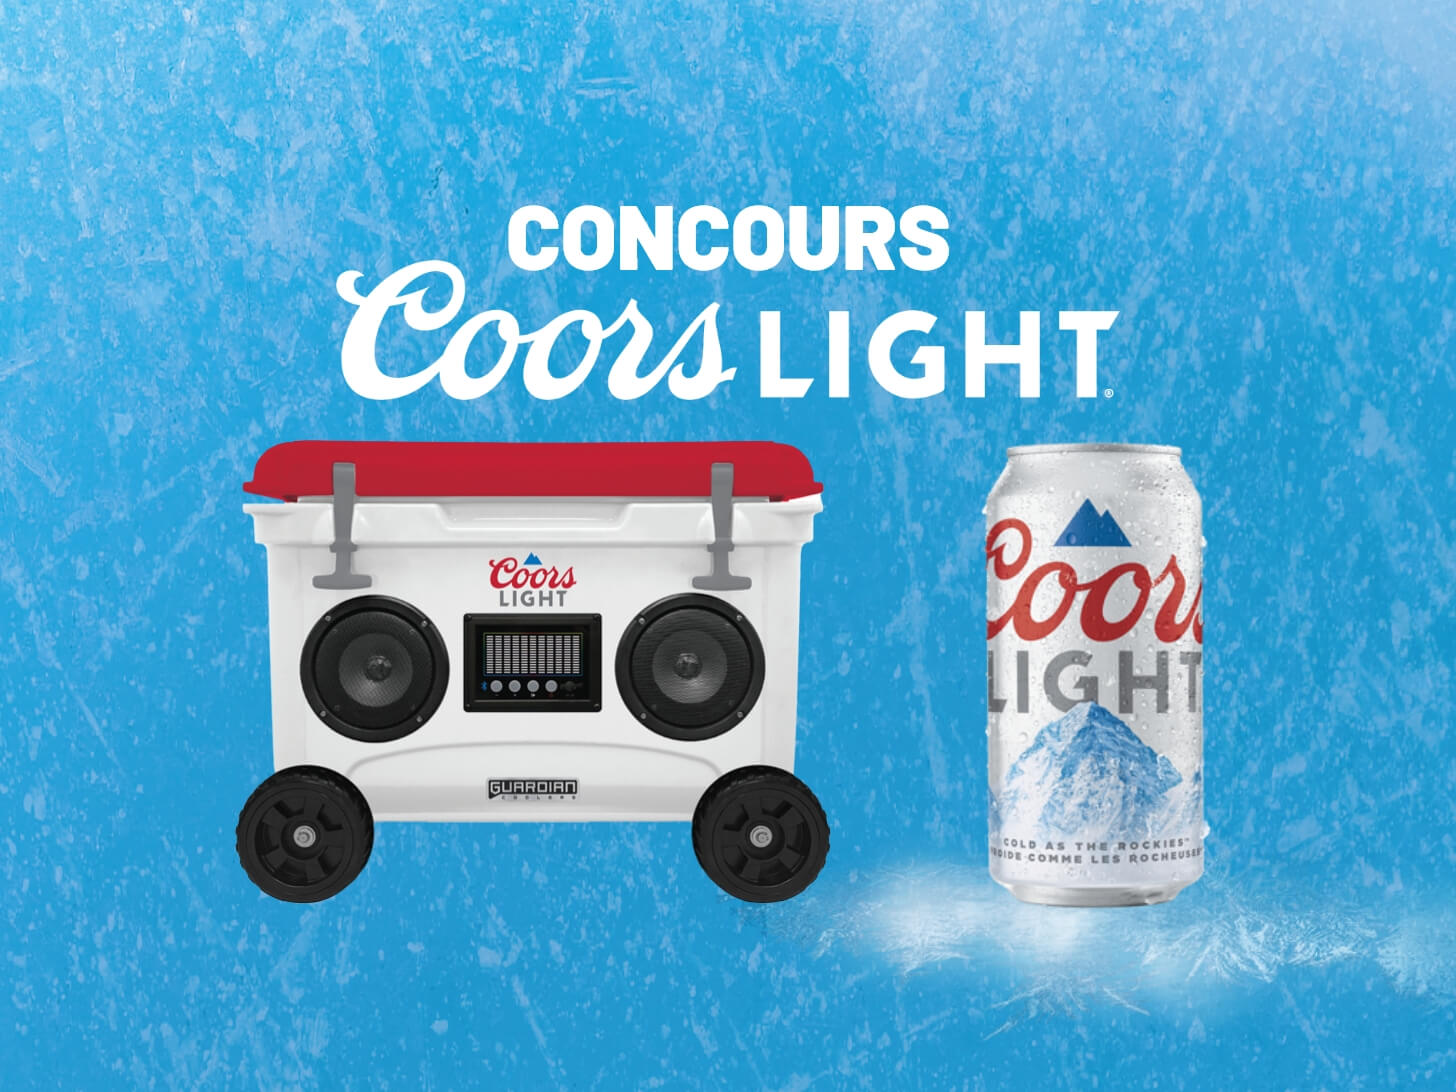 Concours Coors Light